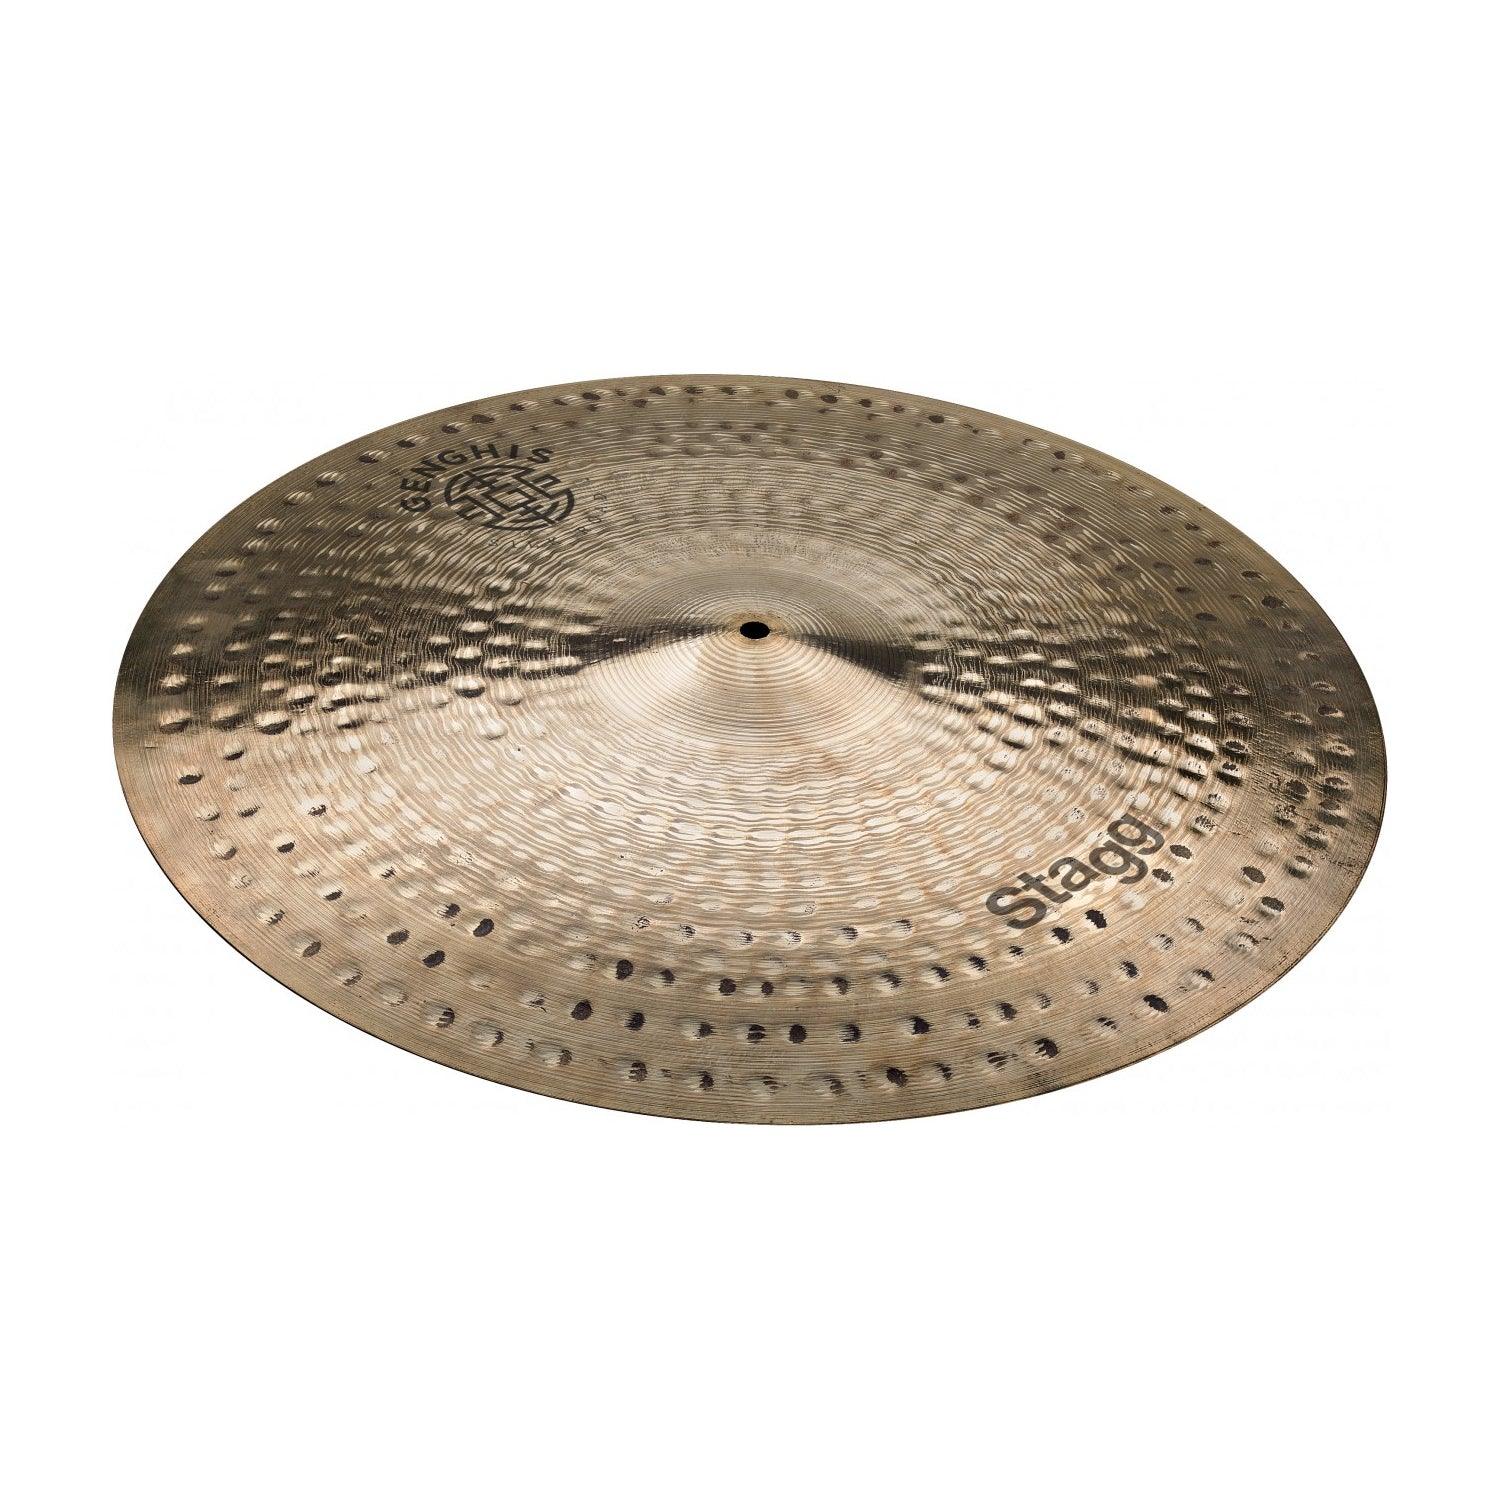 Stagg GENG-RM20R 20" Genghis medium ride Cymbal - DY Pro Audio